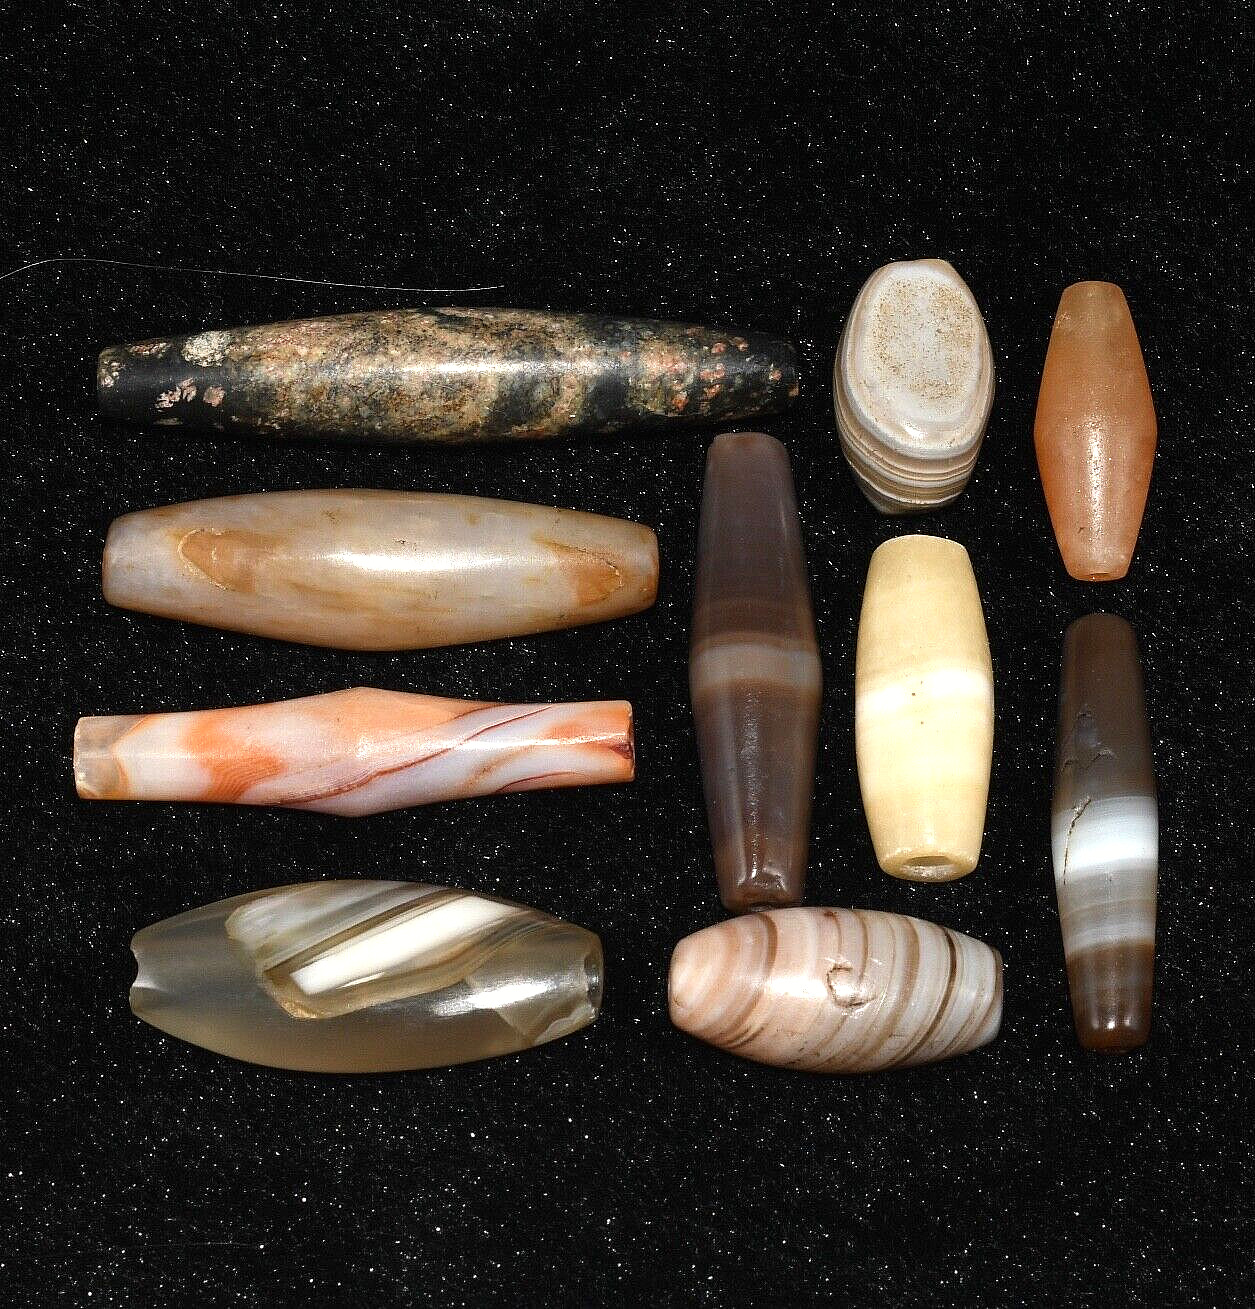 10 Genuine Ancient Central Asian & Middle Eastern Agate Stone Beads